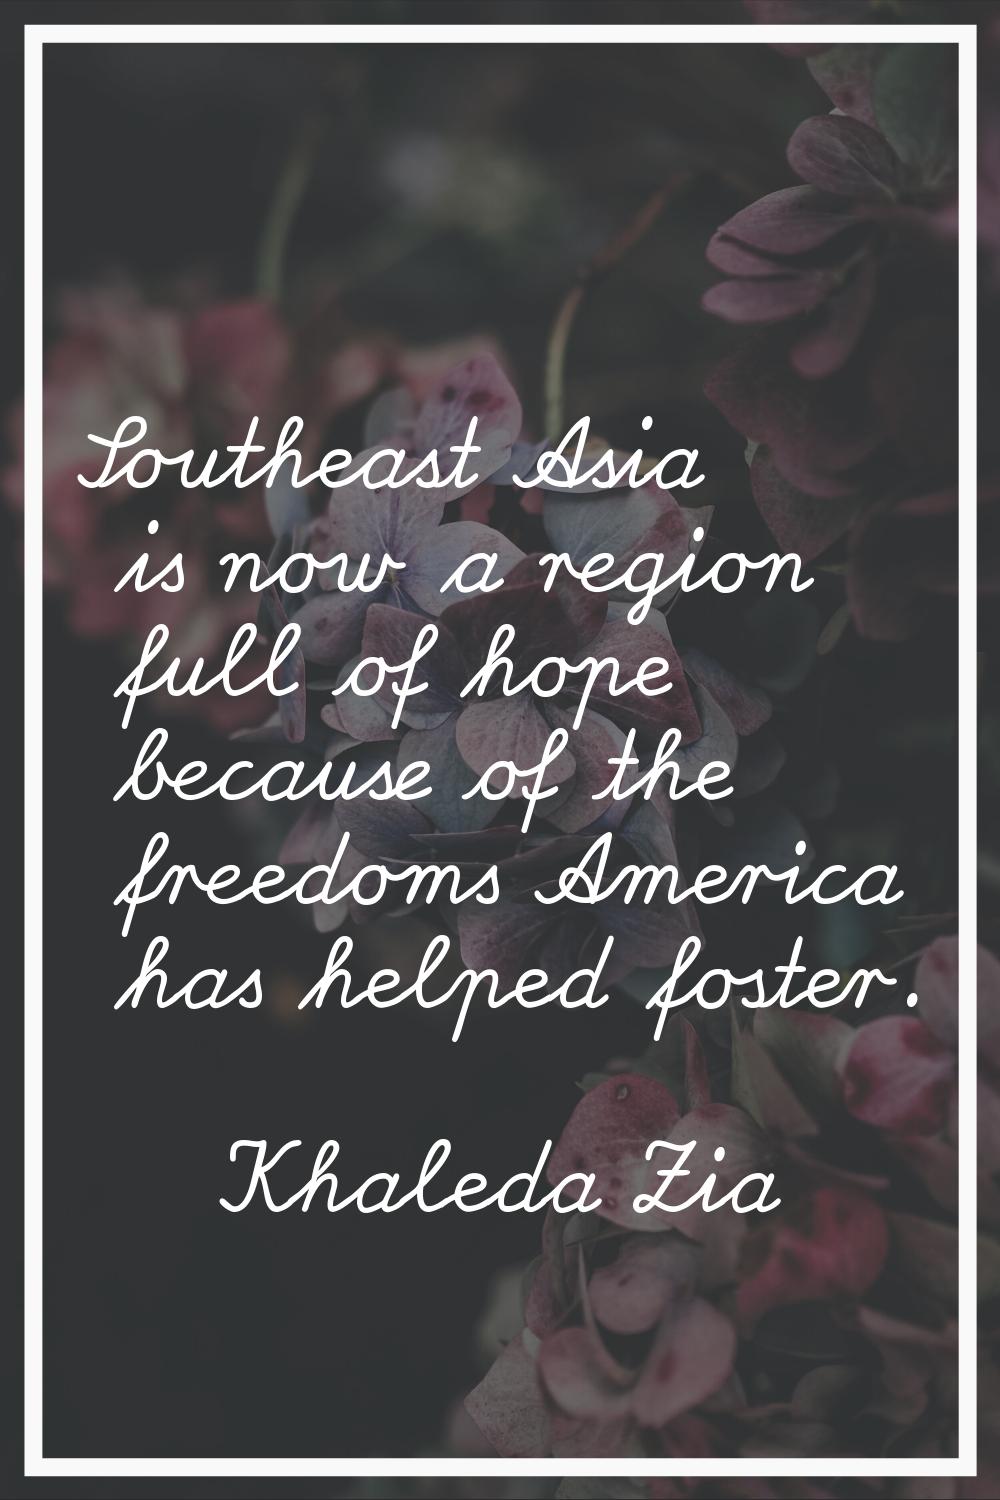 Southeast Asia is now a region full of hope because of the freedoms America has helped foster.